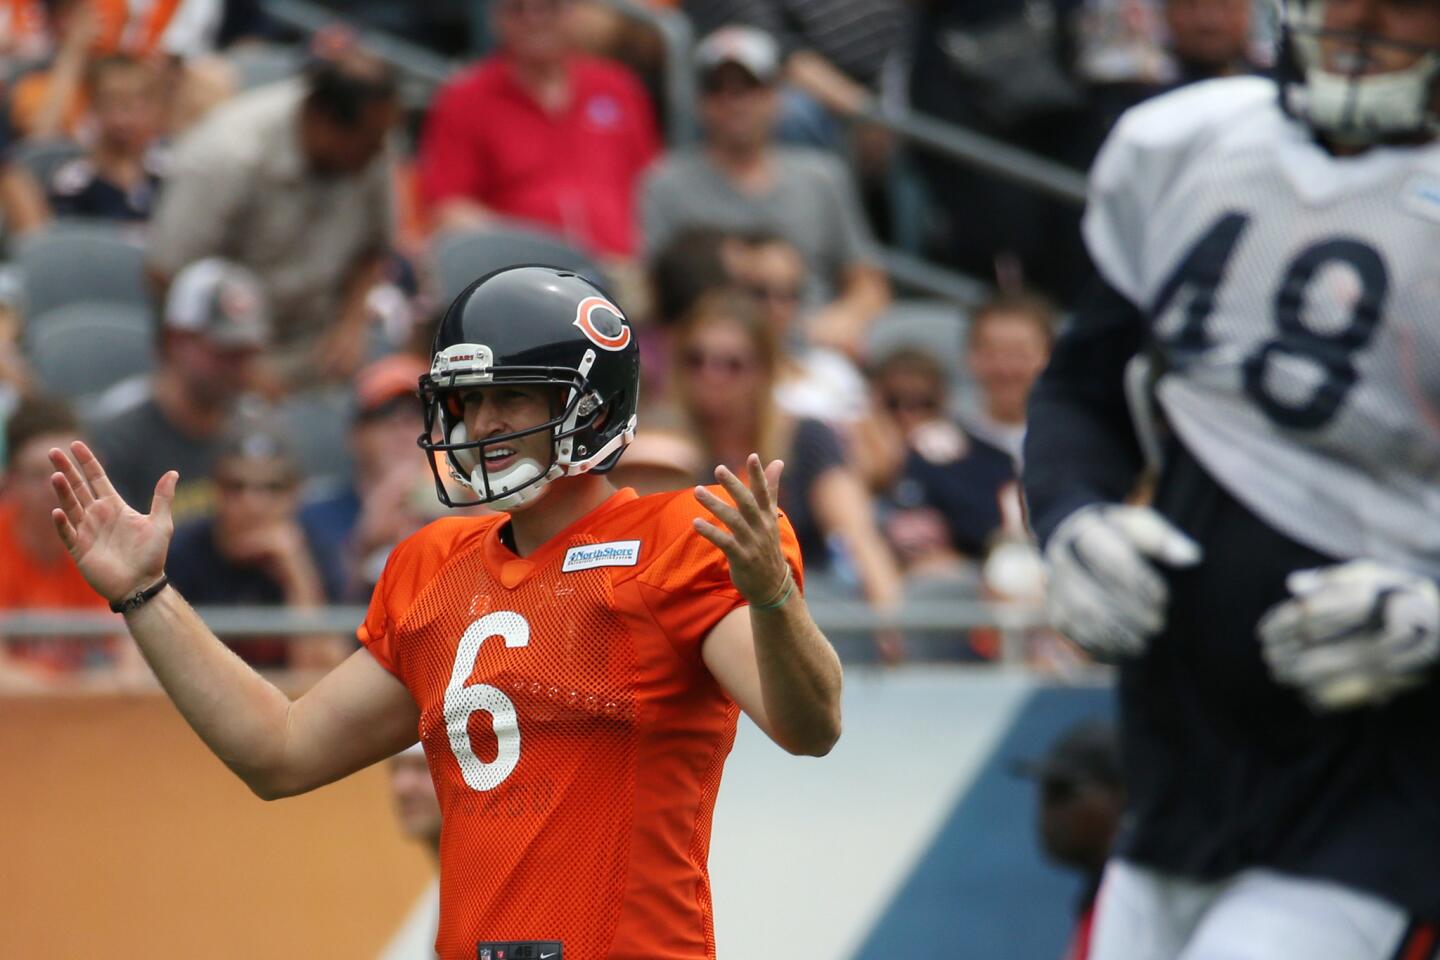 Bears quarterback Jay Cutler gestures to his teammates after he was unable to complete a pass.